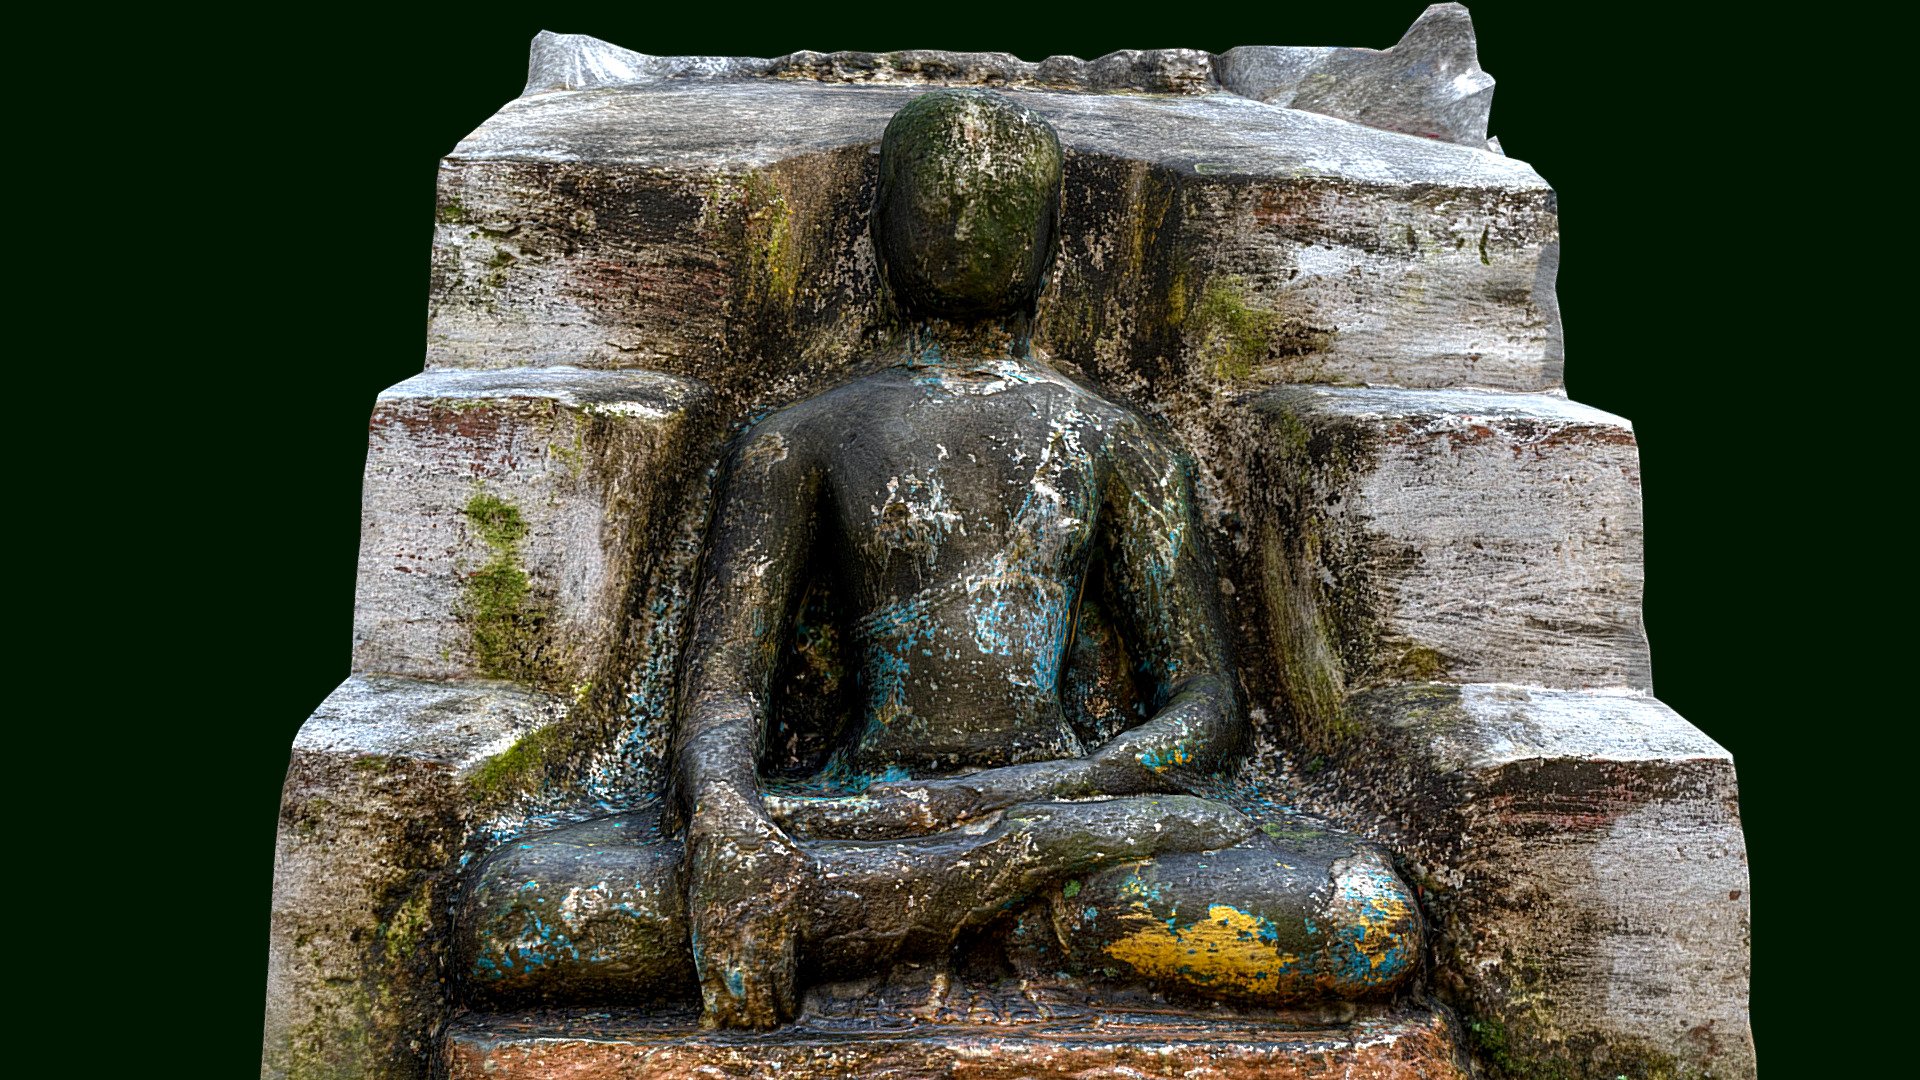 This Buddha sculpture at Alkohiti belongs to 5th century in early Licchavi period(5th-8th century). 

Alkohiti is an ancient stone spout in the Lalitpur district of Nepal made at man-made depression. This 24/7 functioning spout was used to serve water to the surrounding area. There are about 389 stone spouts in the Kathmandu Valley, and the natural sources of 225 spouts have dried up in modern days. More than thousand years later, Alkohiti still remains functioning. 

About the model :

25k tris clean topology with manual UVs, 4k textures including diffuse/normal/specular/occlusion/cavity maps.



 - 5th century Buddha - Nepal Heritage - Buy Royalty Free 3D model by 3Dystopia (@Dystopia) 3d model